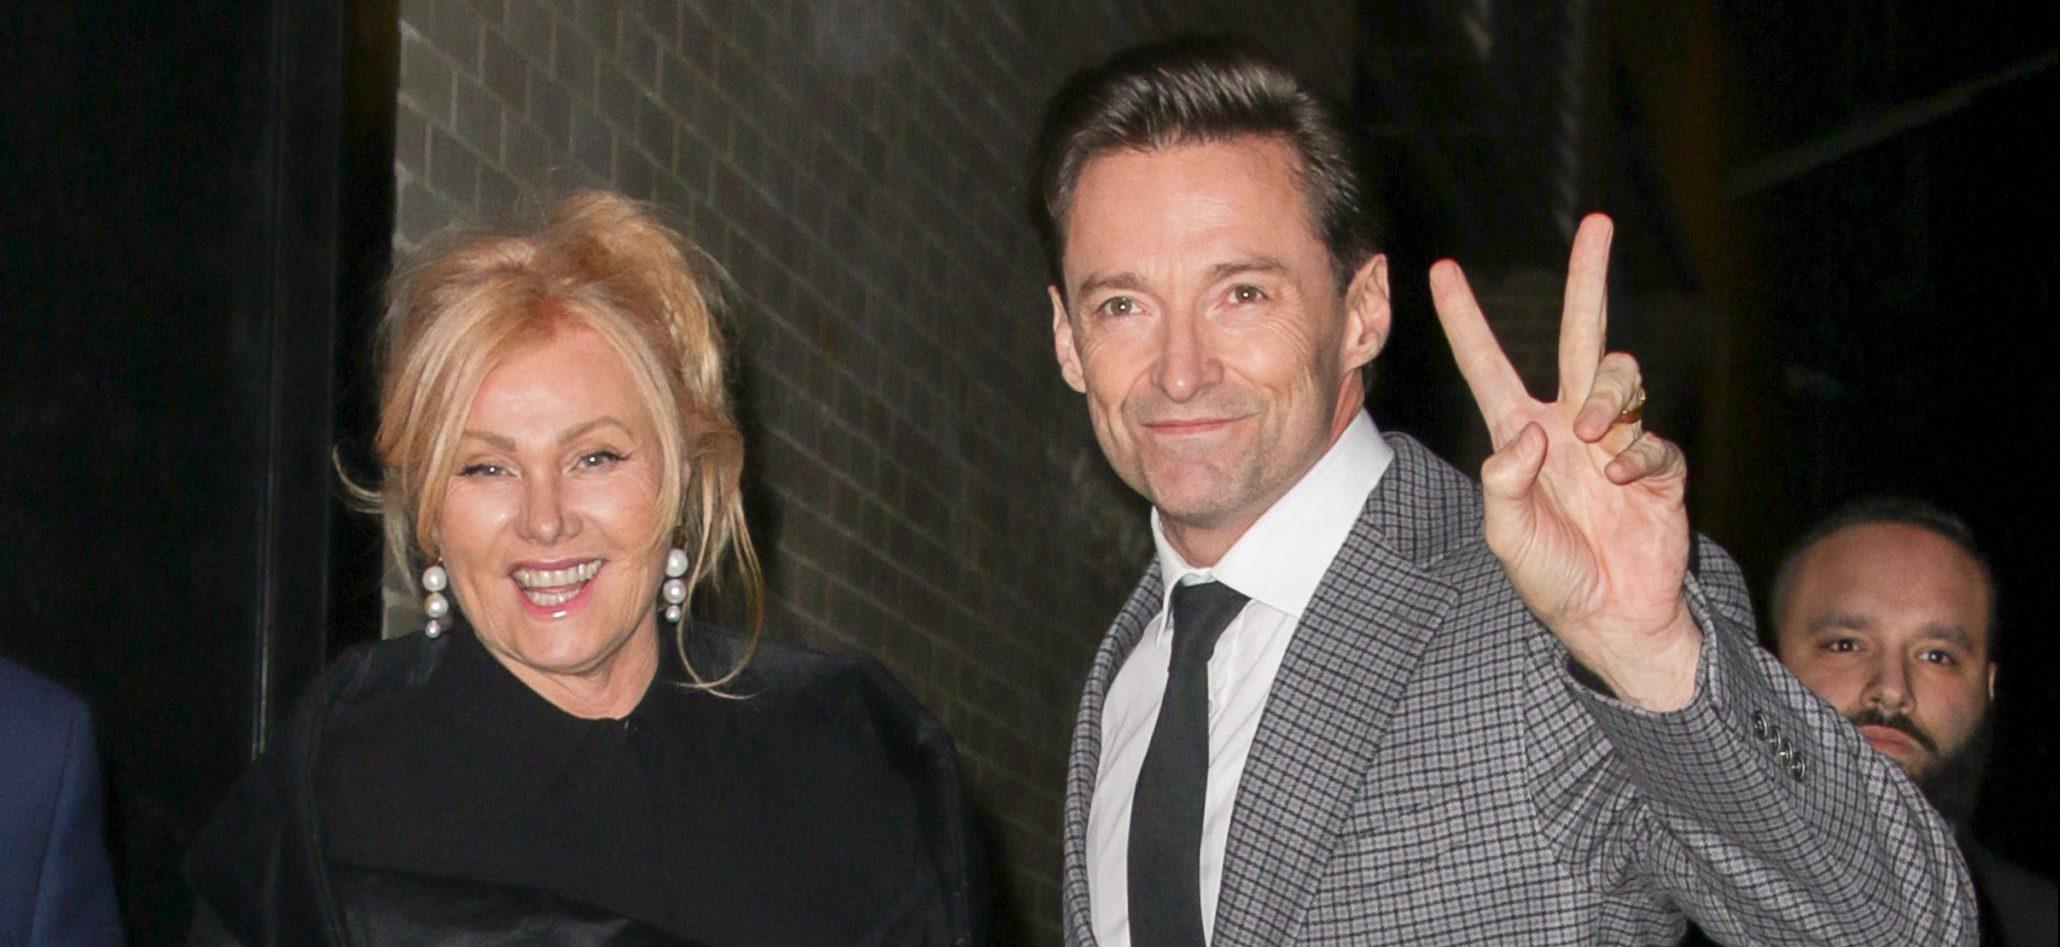 Hugh Jackman and wife Deborra-lee Furness seen arriving at The 12th Annual Golden Heart Awards in NYC